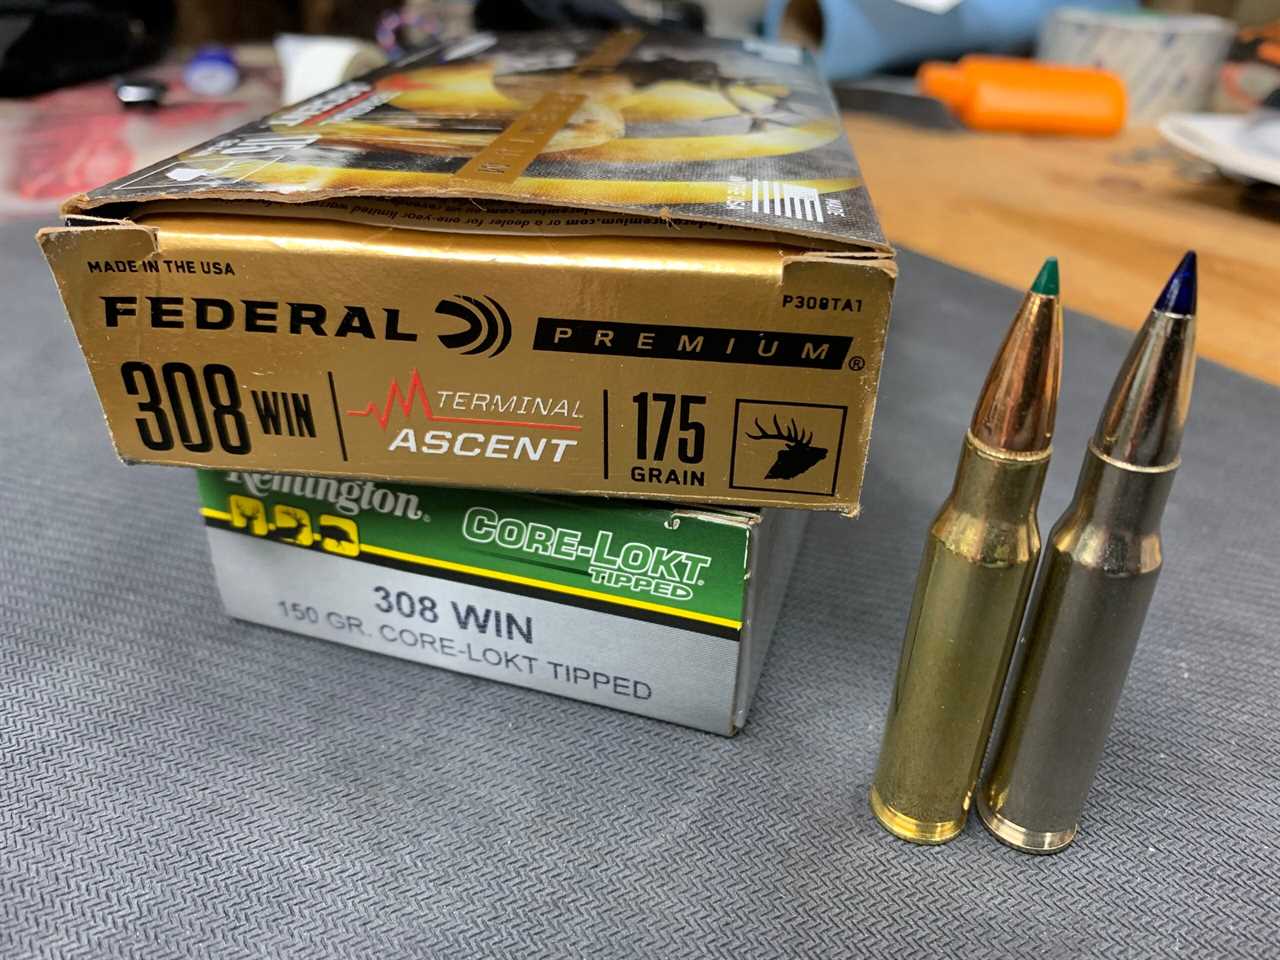 Federal Premium Terminal Ascent and Remington Core-Lokt Tipped loads